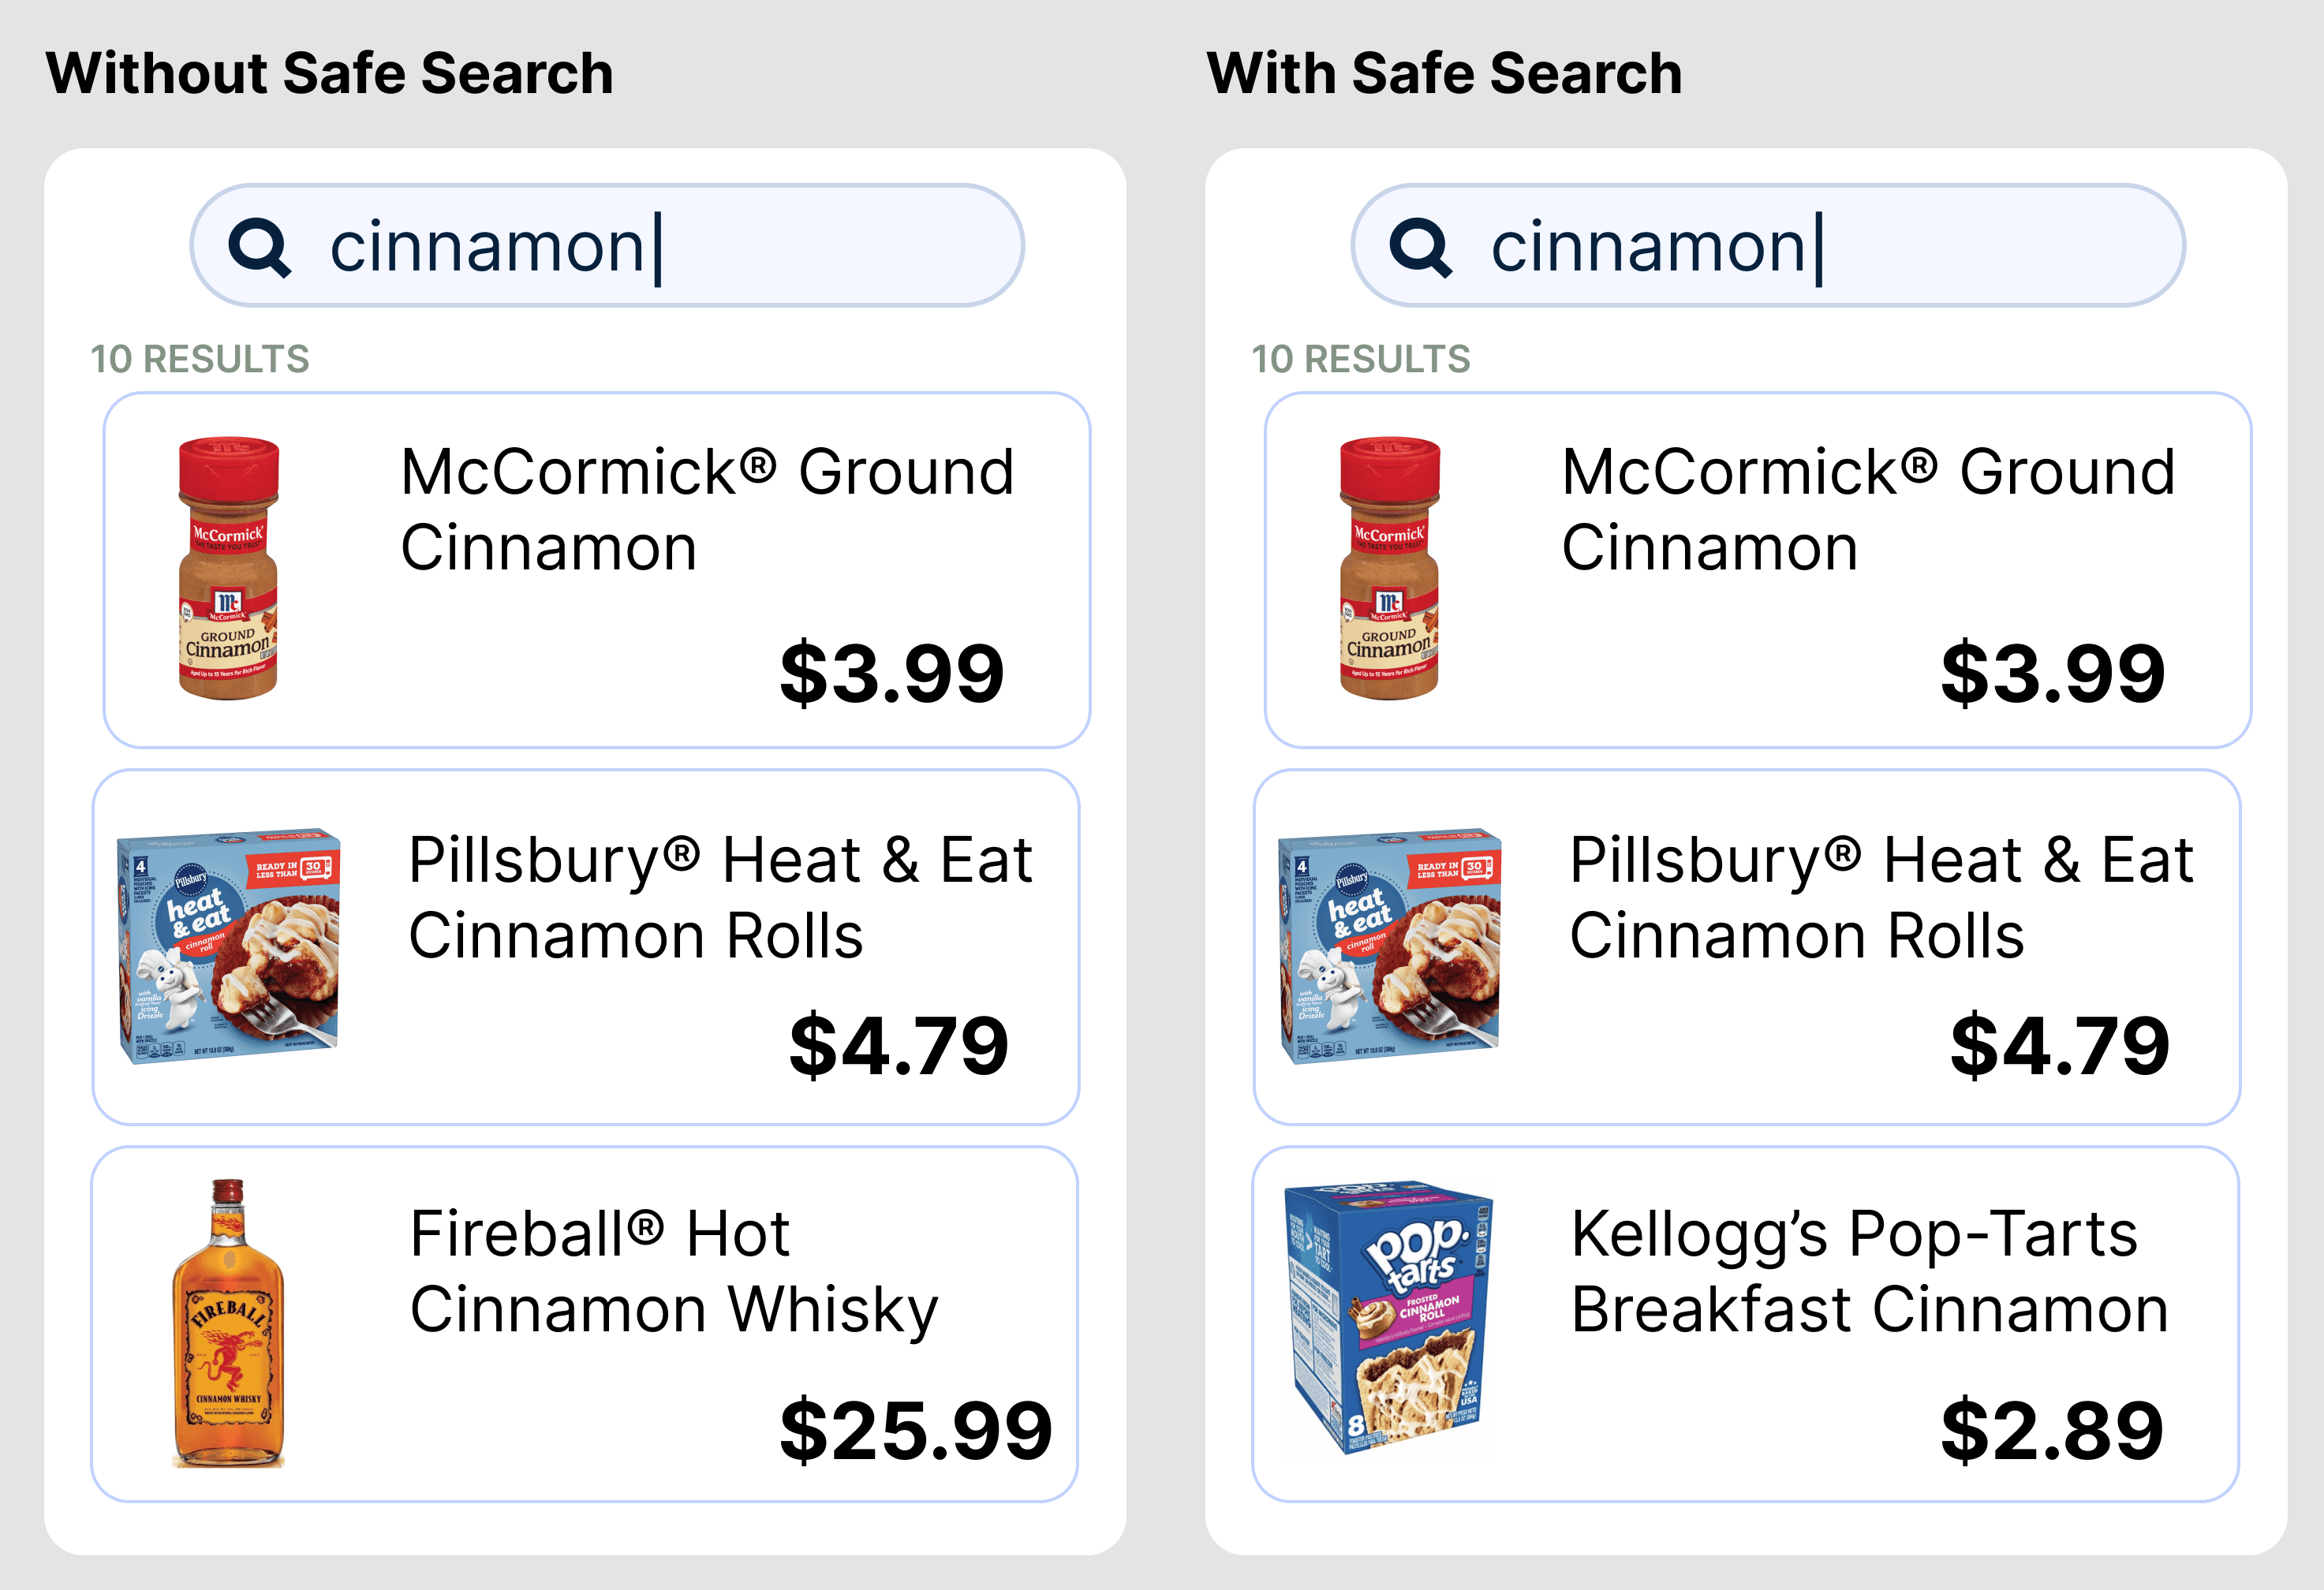 safesearch_cinnamon.png